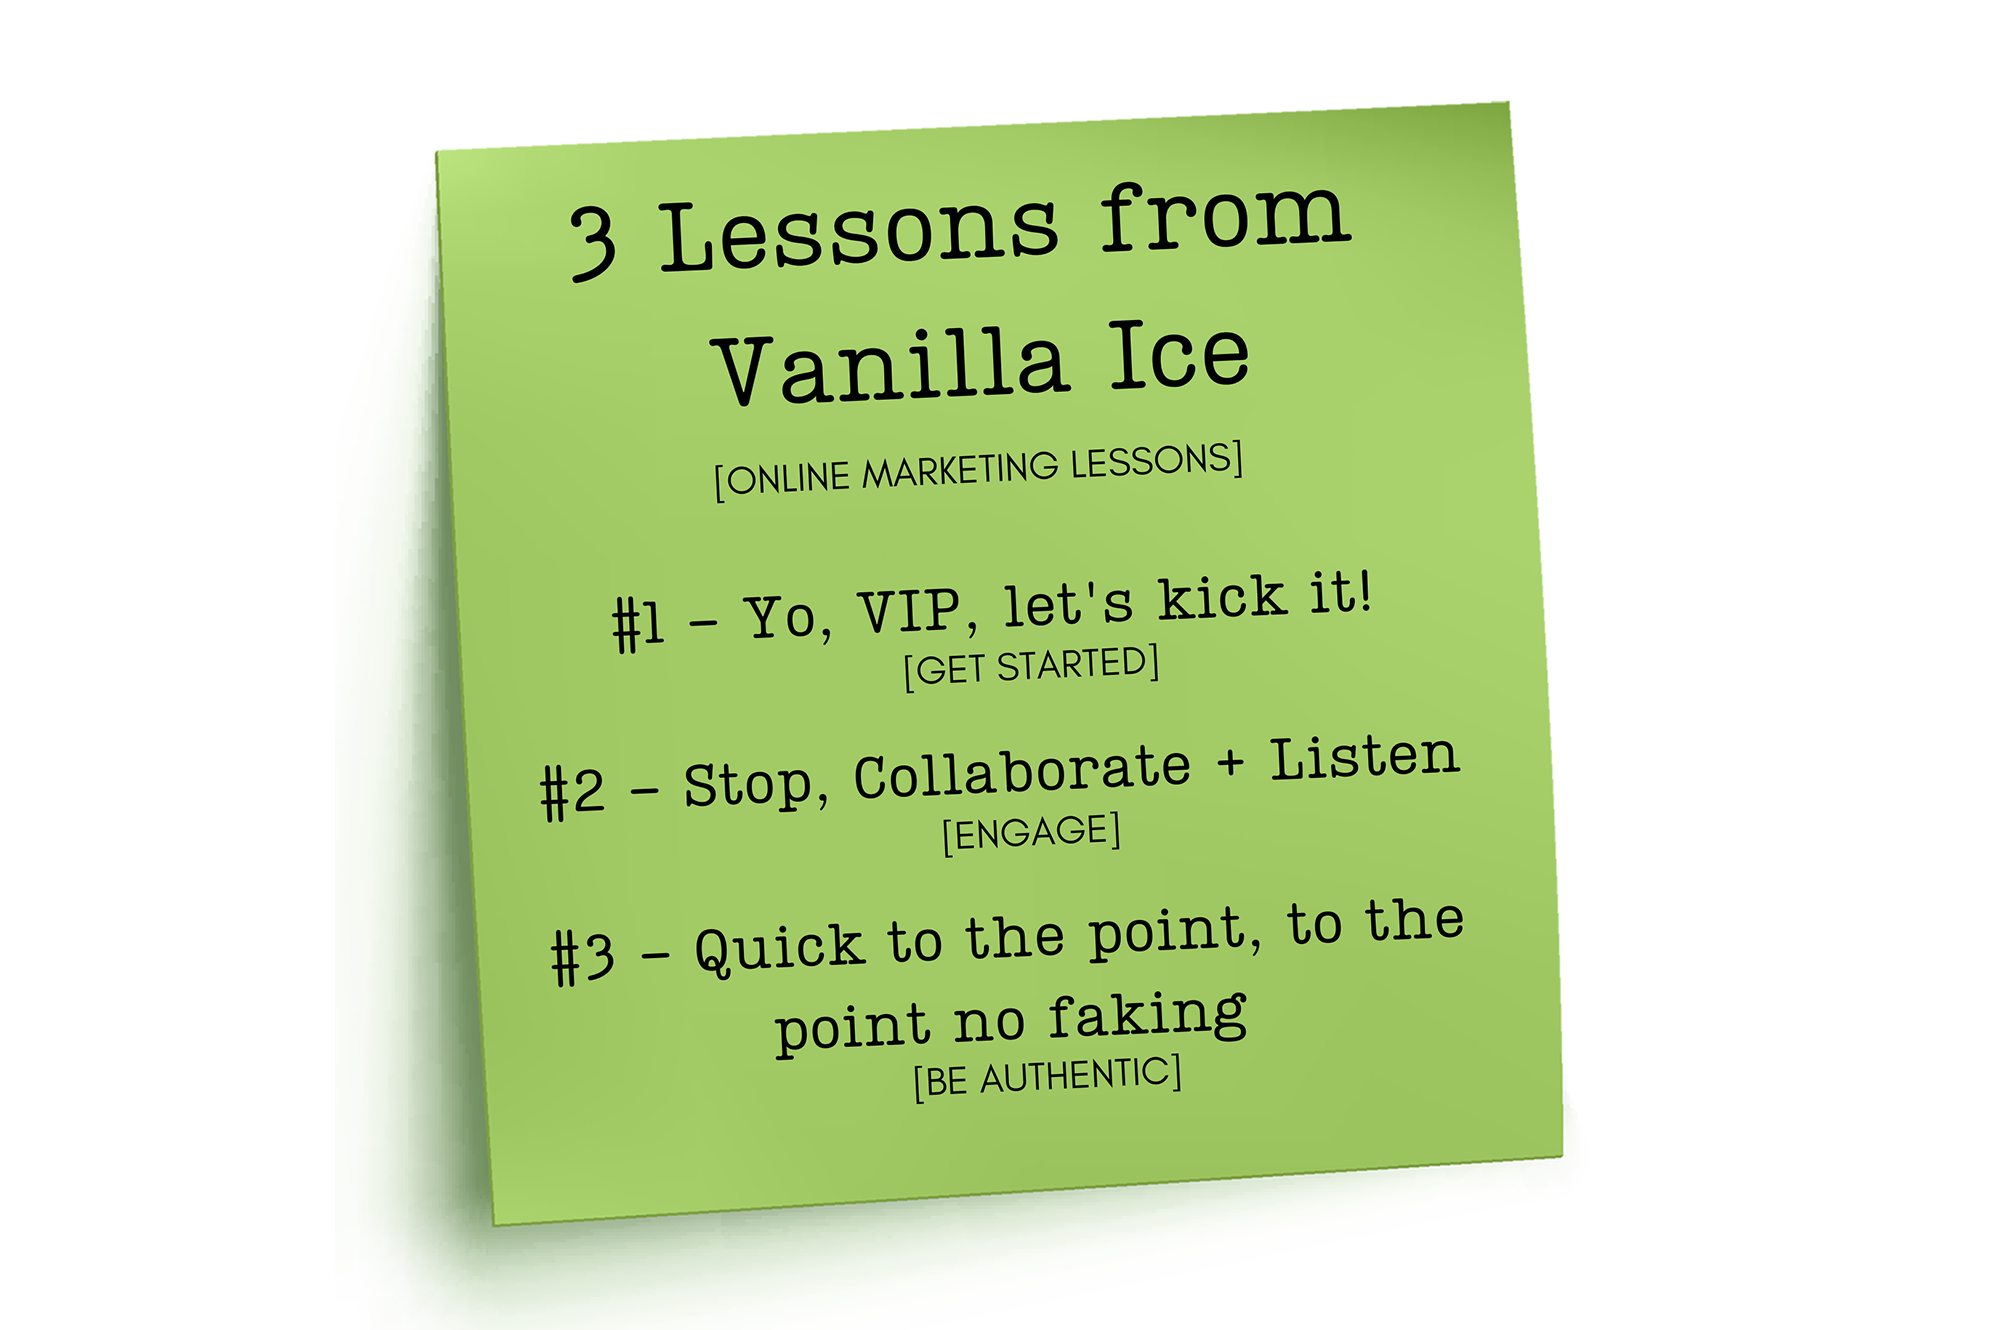 3 Lessons from Vanilla Ice